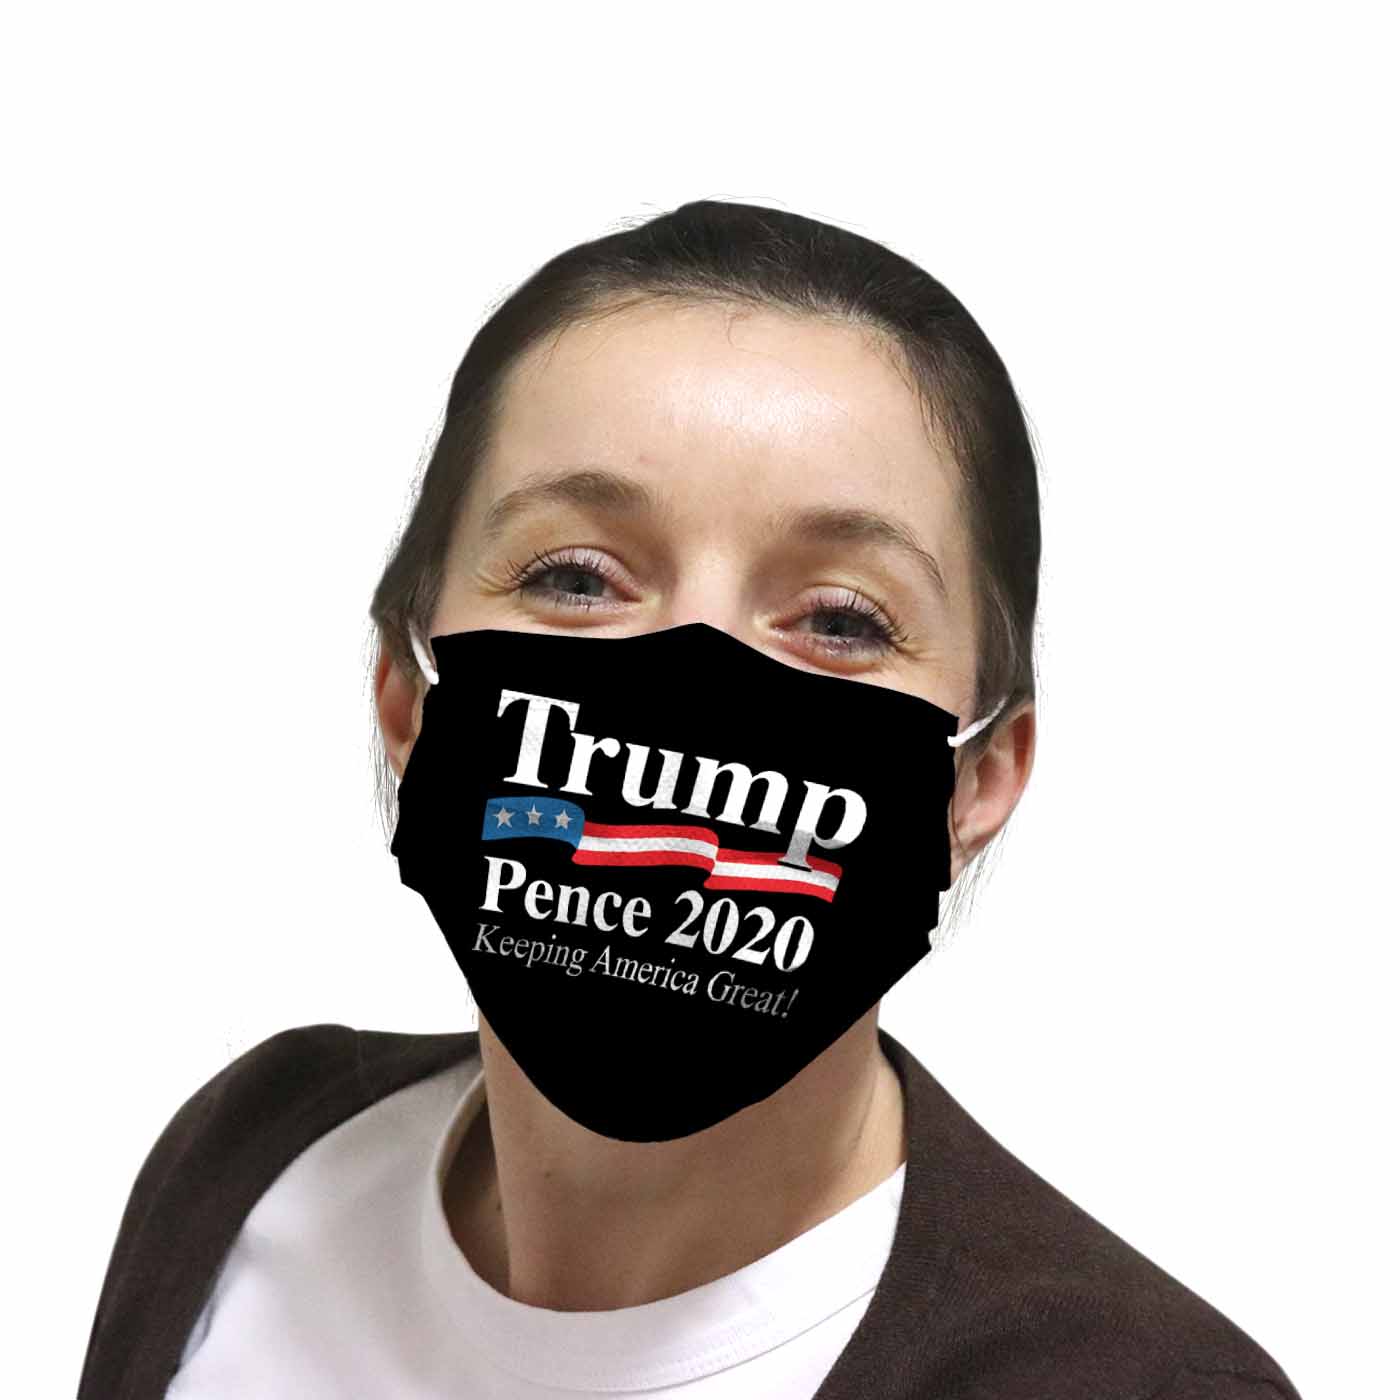 Trump pence 2020 keeping america great full over printed face mask 1